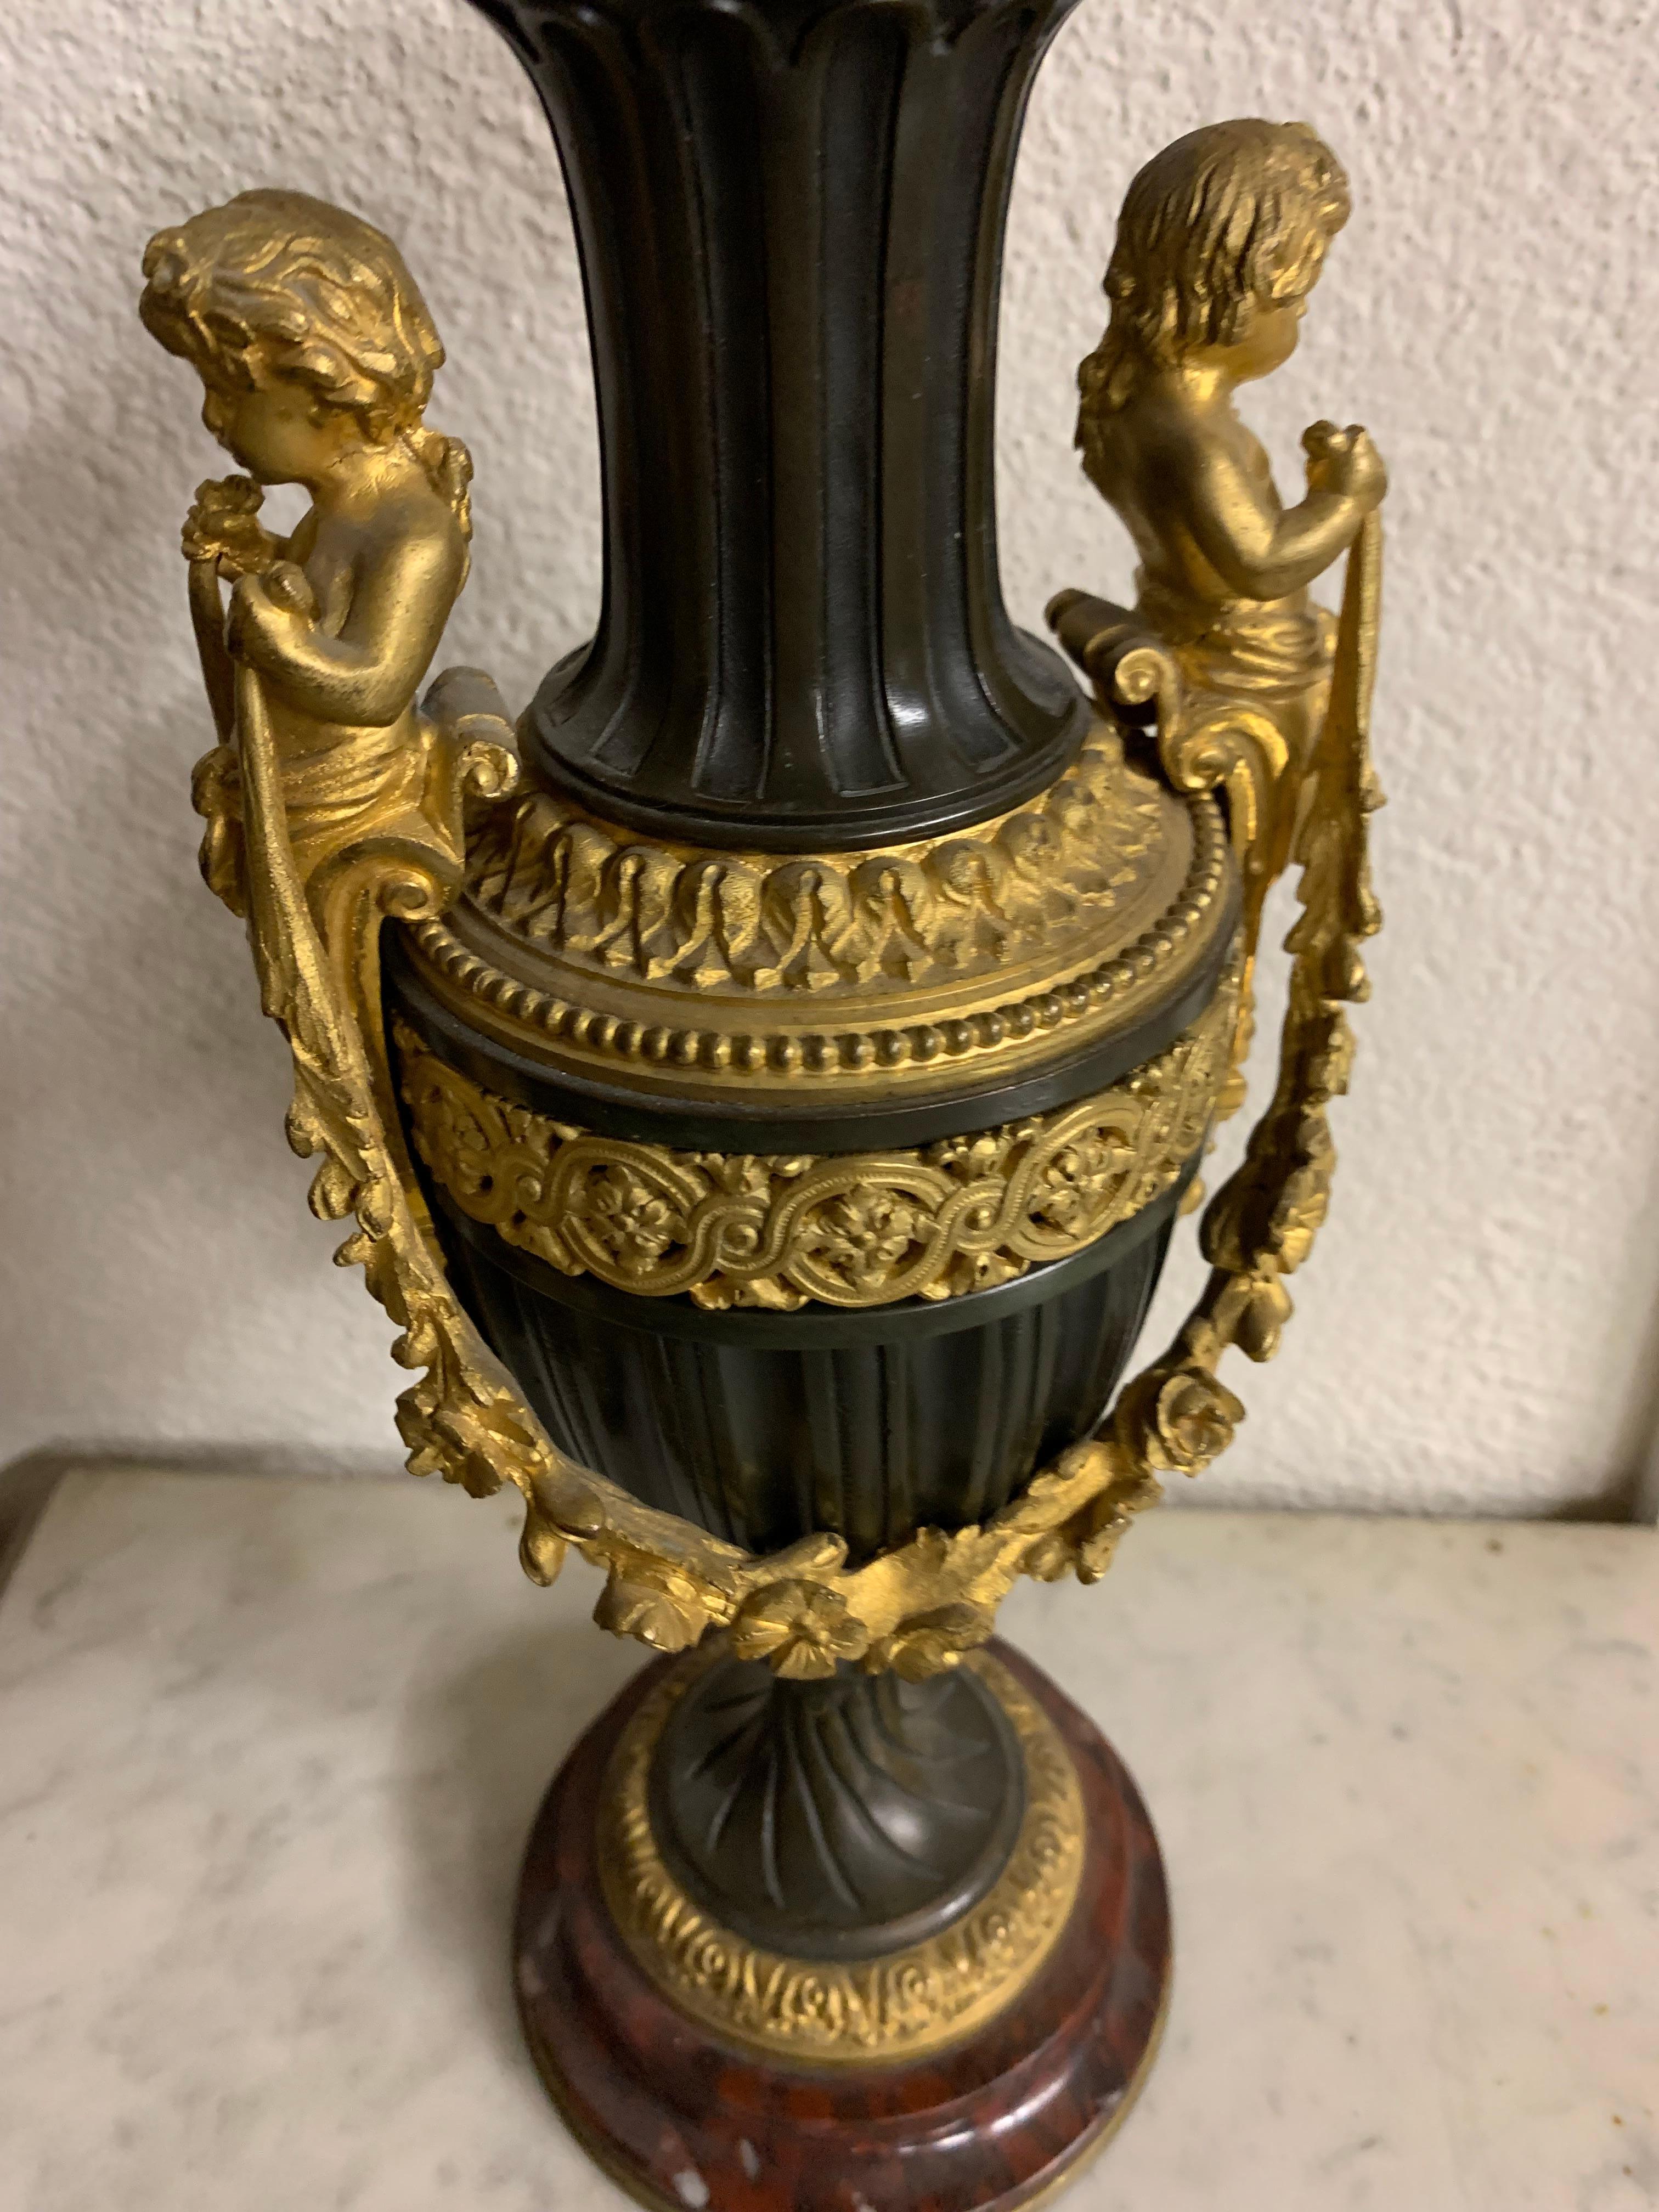 A very fine pair of vase with cherub on the side. The base is griotte marble Its bear the mark of Millet a paris on the base of the vase.
 